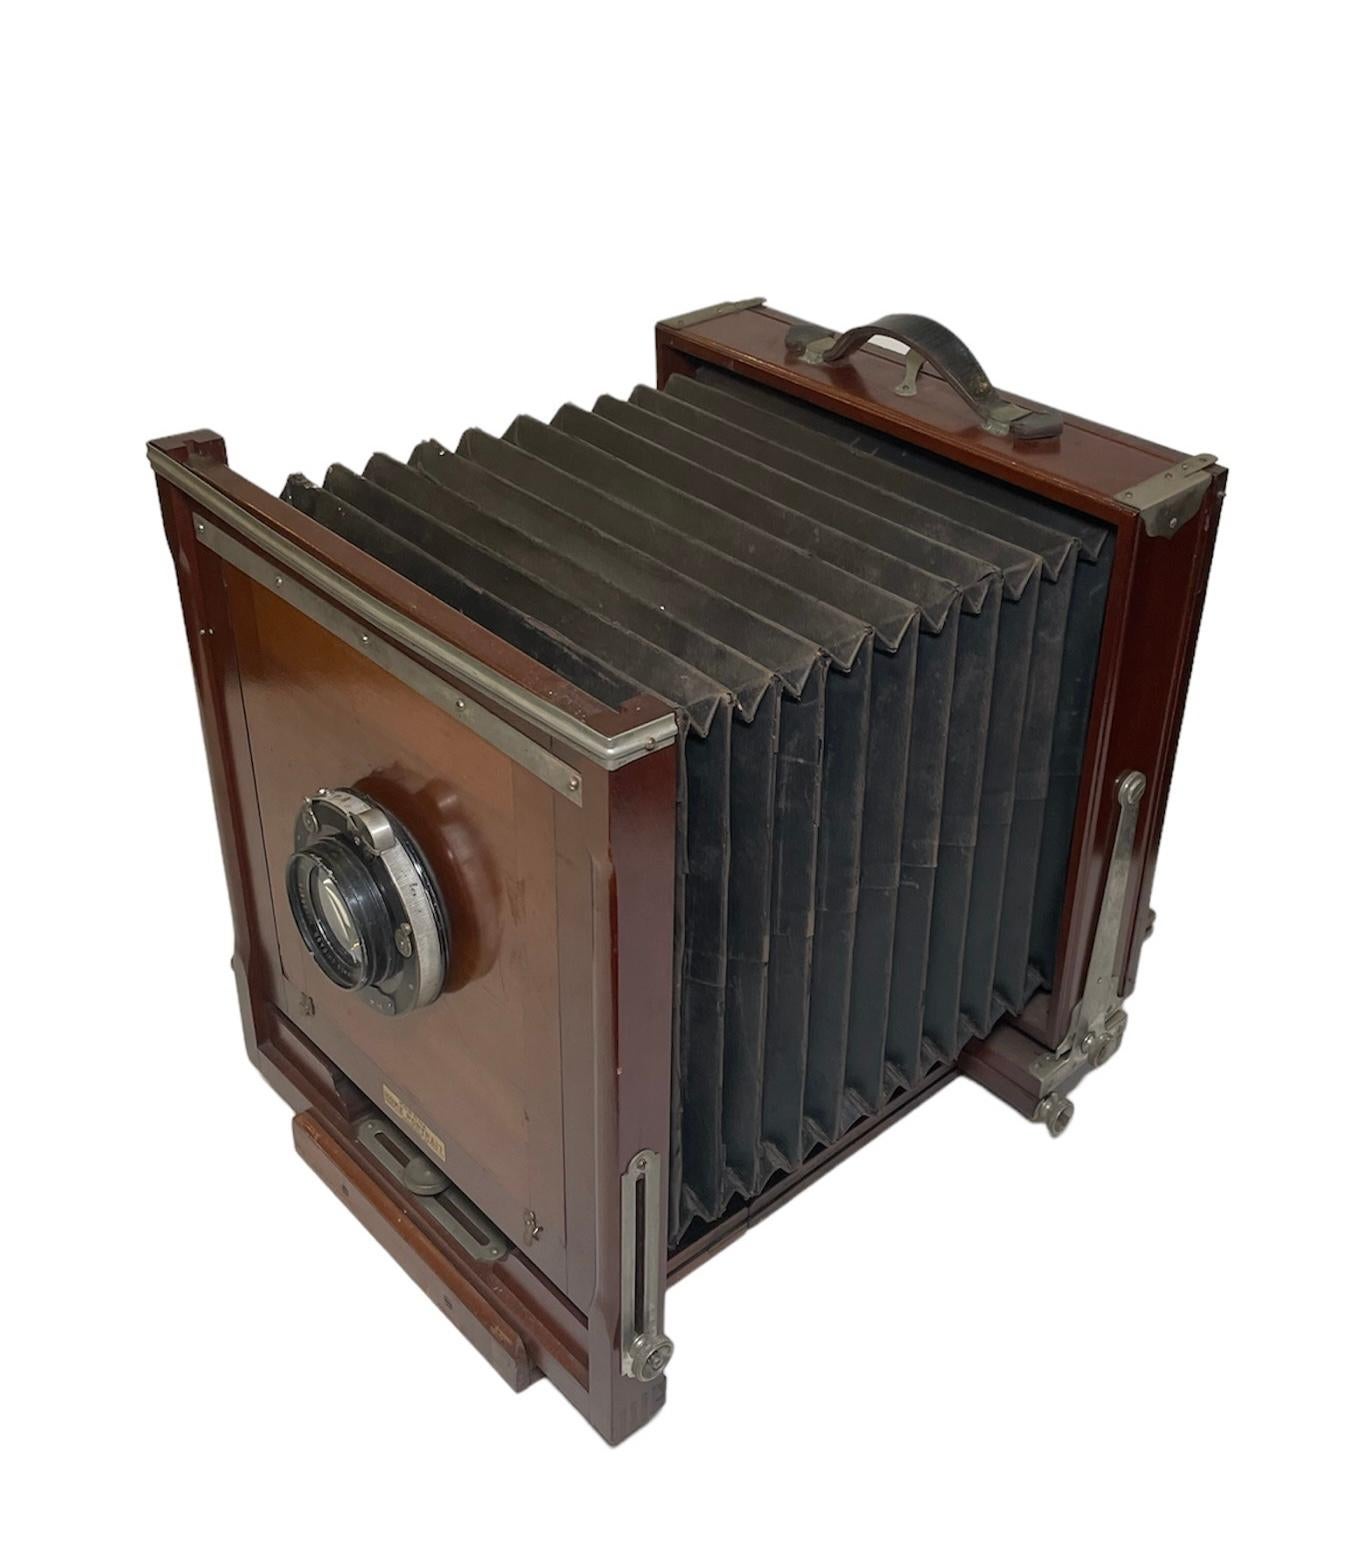 This is a Korona Home Portrait Camera. It depicts a square wood camera body and base with square glass in the back and metal hardware. In the middle, there is an accordion like black leather structure. A black leather handle is in the top center. A